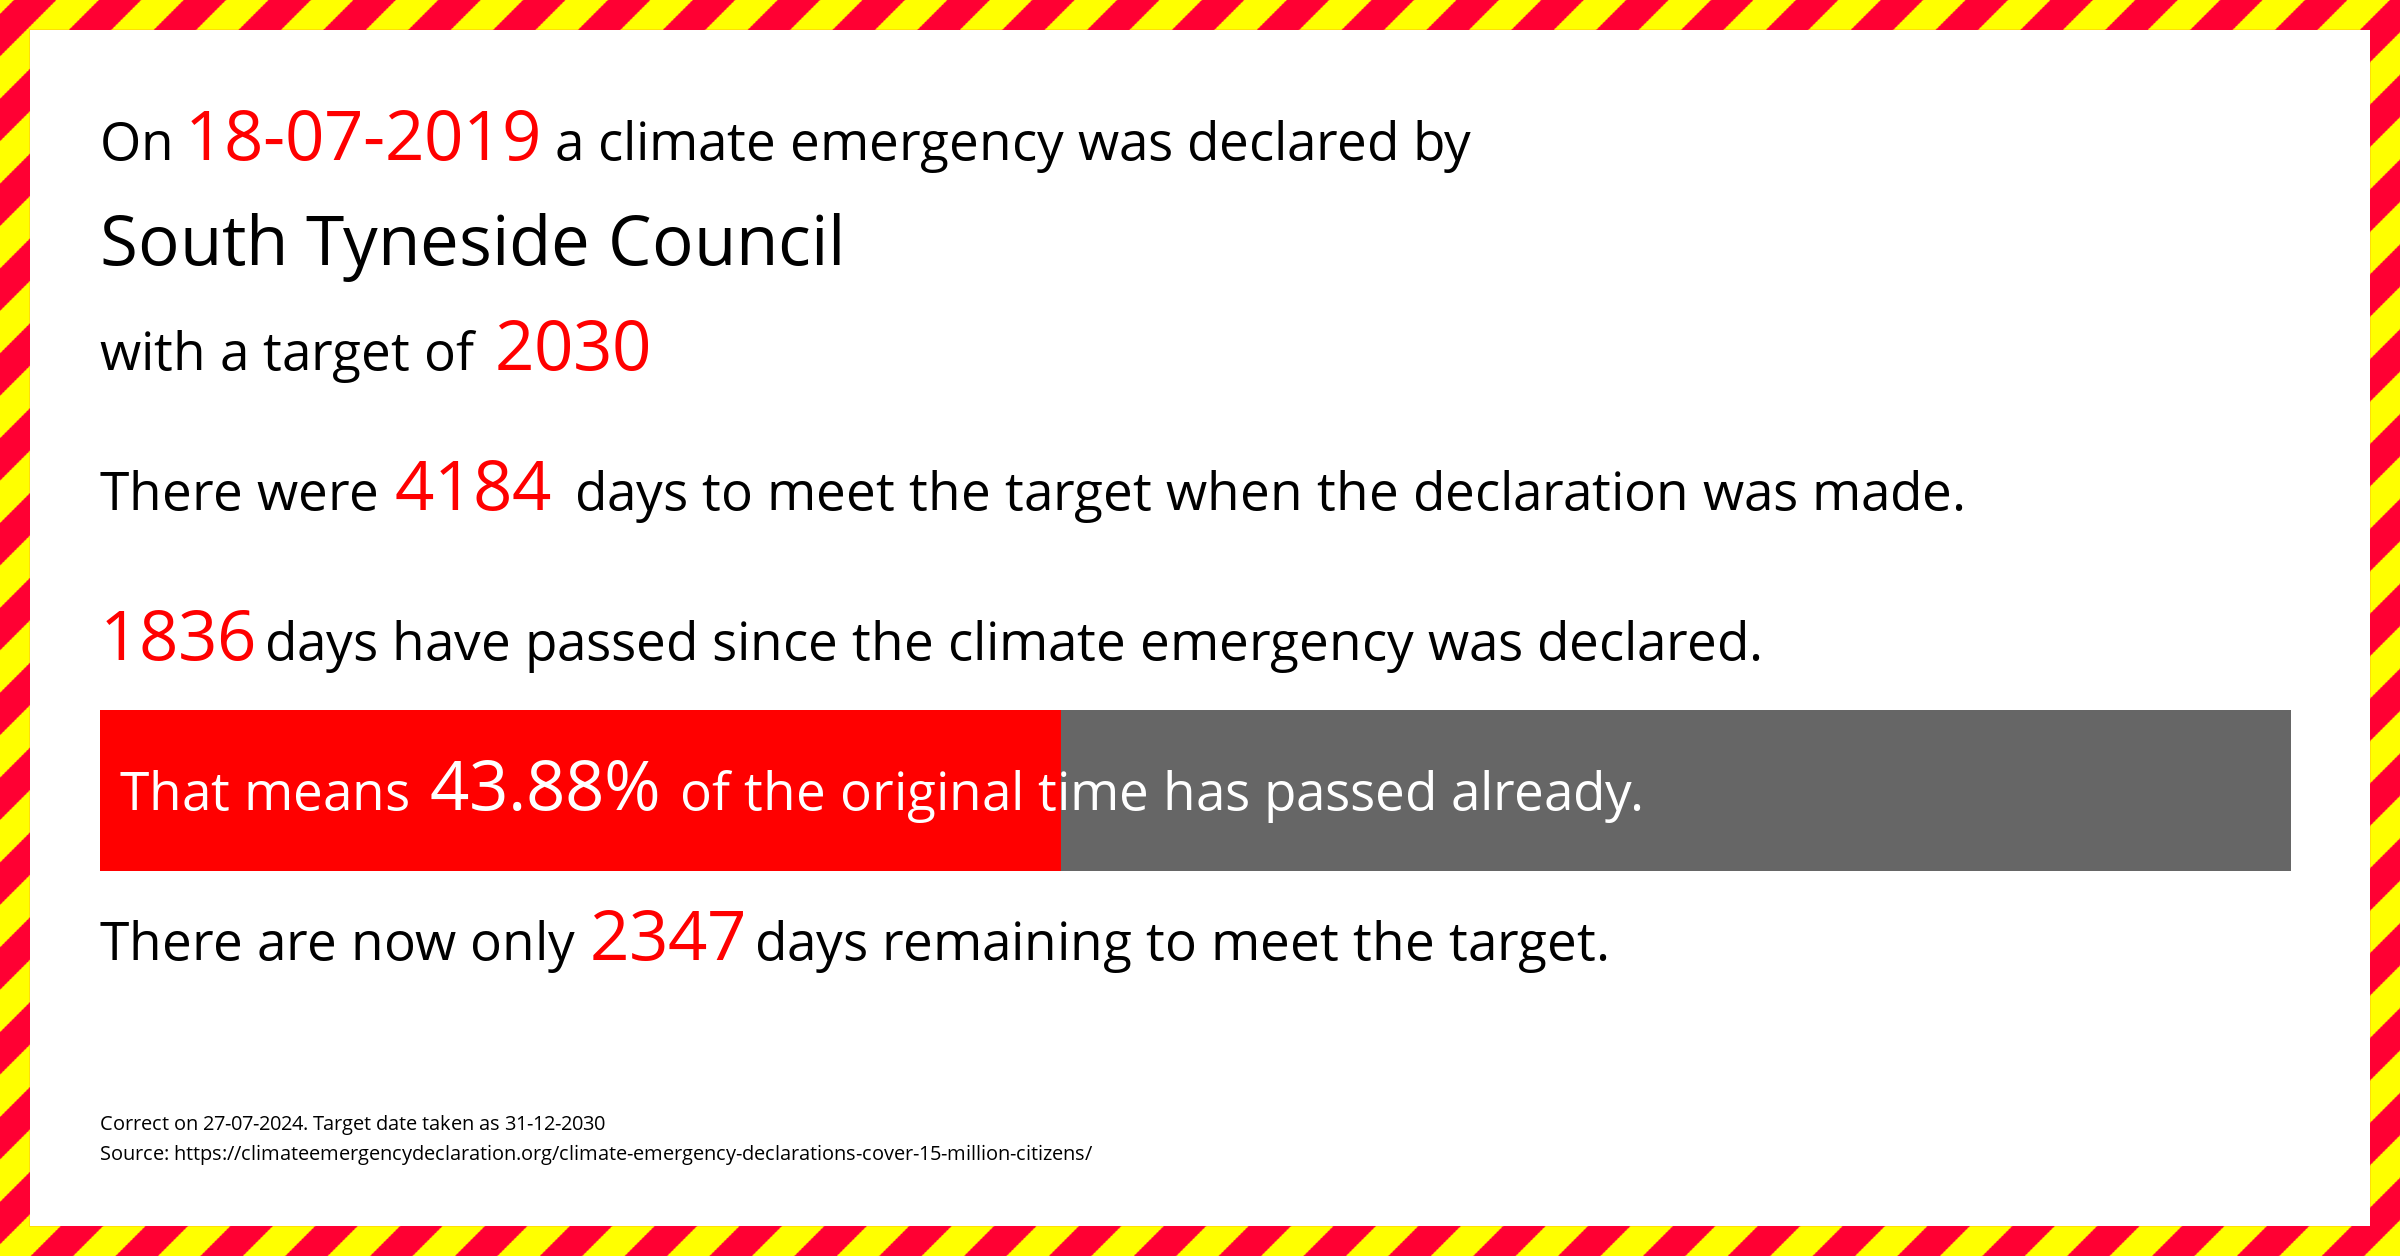 South Tyneside Council declared a Climate emergency on Thursday 18th July 2019, with a target of 2030.